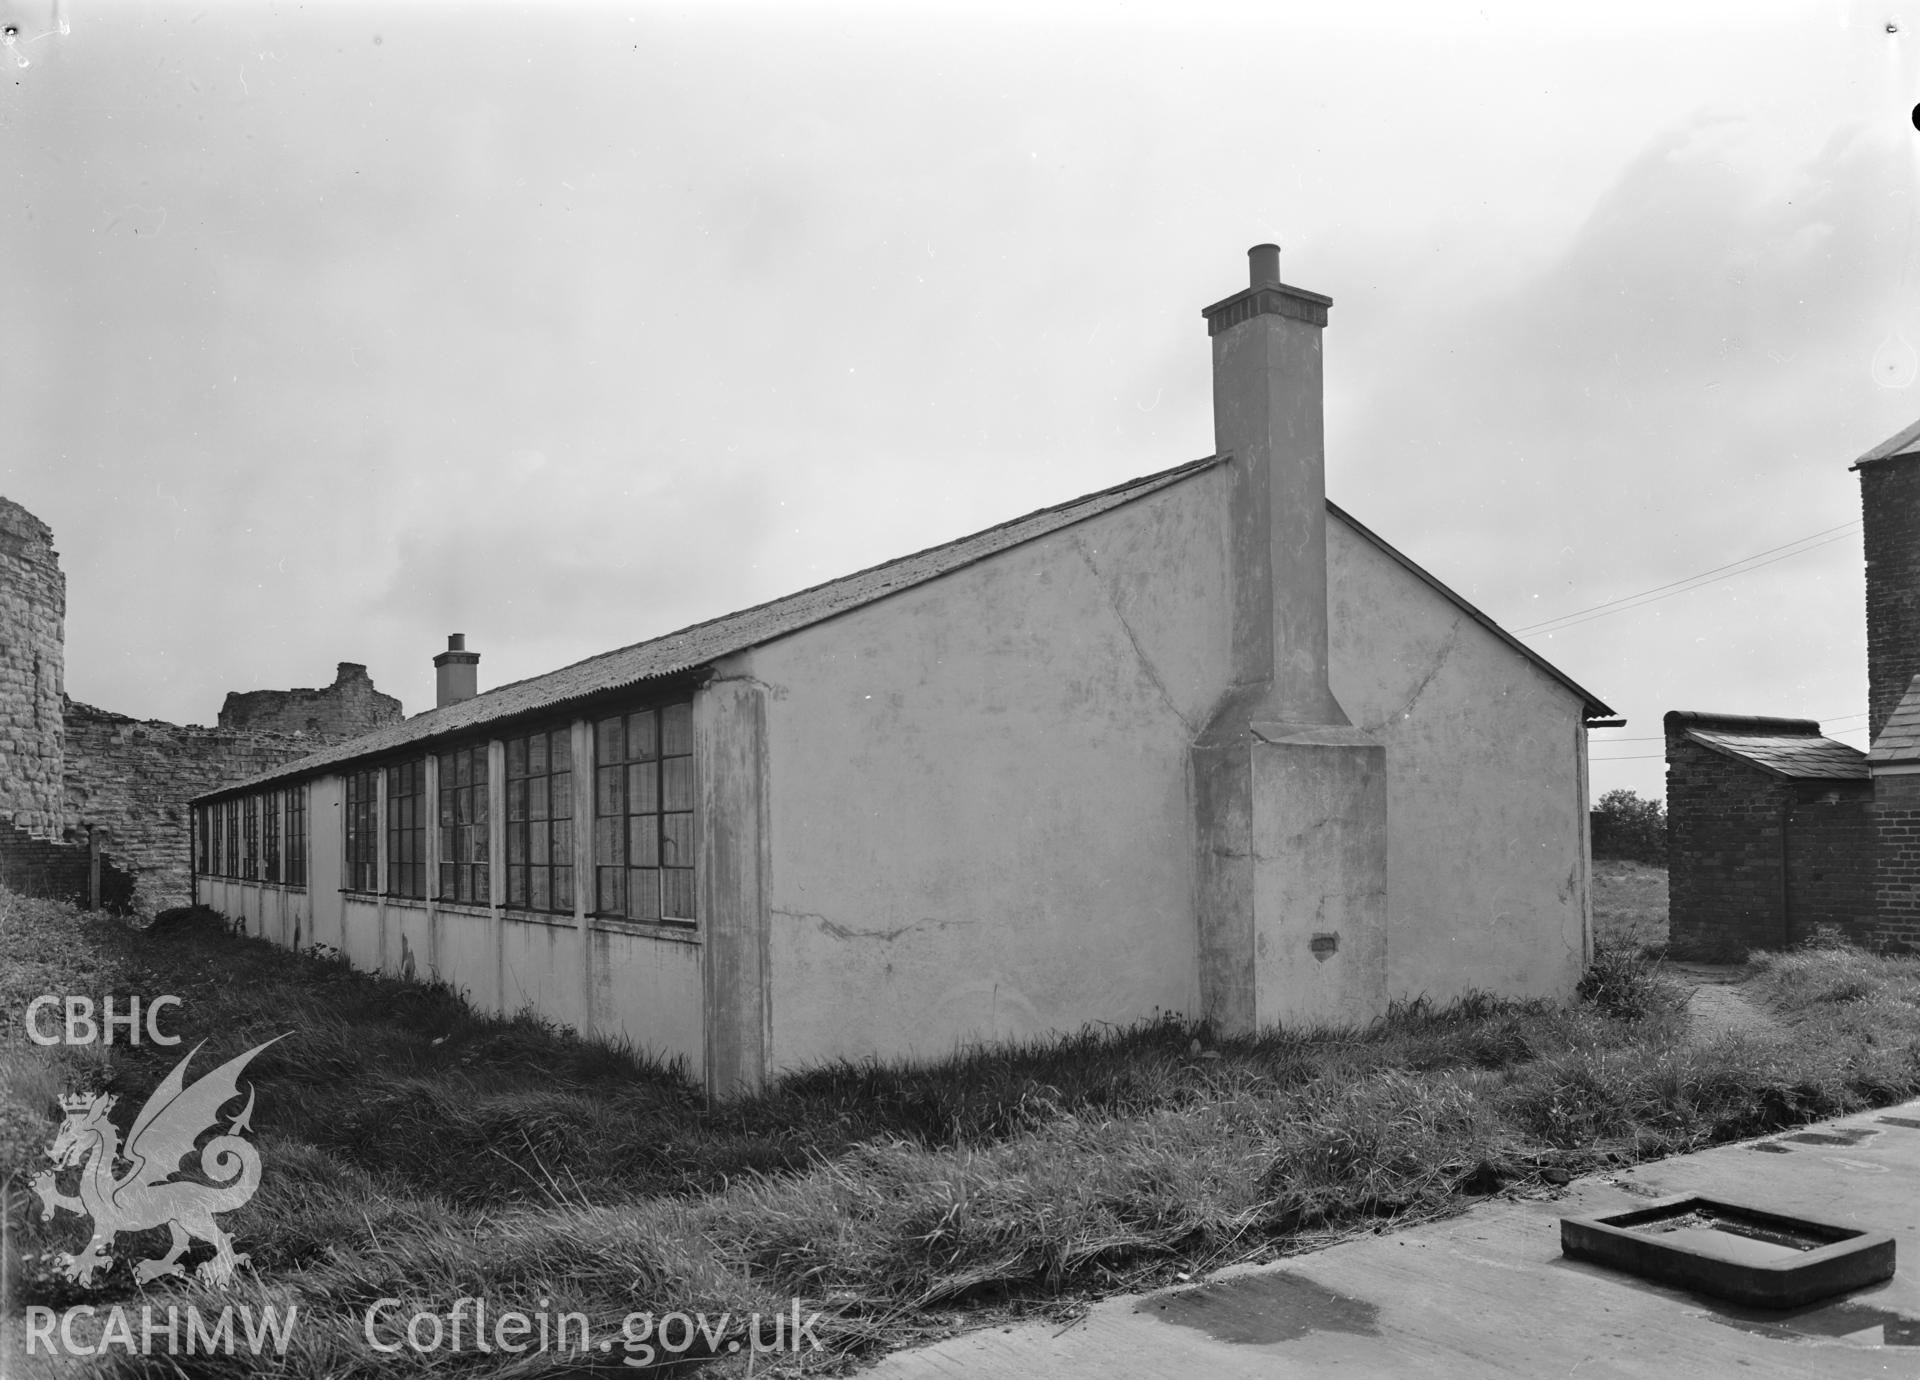 D.O.E photograph of Flint Gaol - army cadets hut from south west. In castle outer ward (since removed).